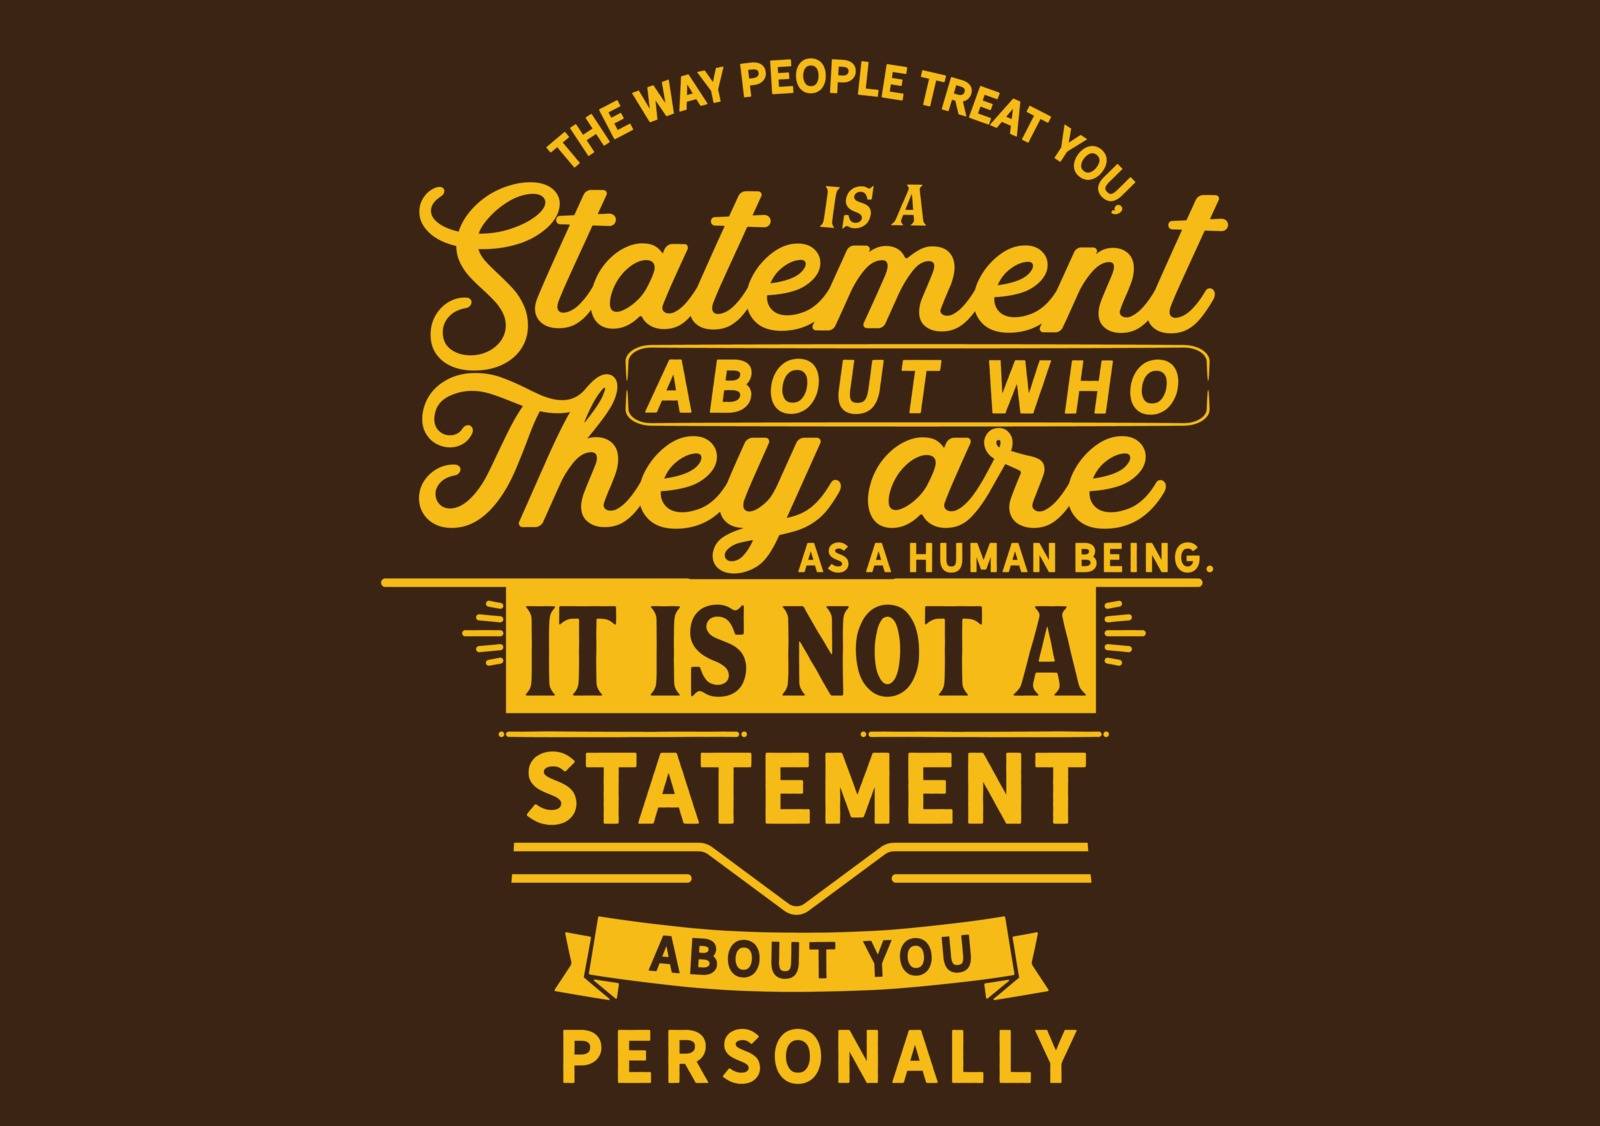 The way people treat you, is a statement about who they are as a human being. It is not a statement about you personally